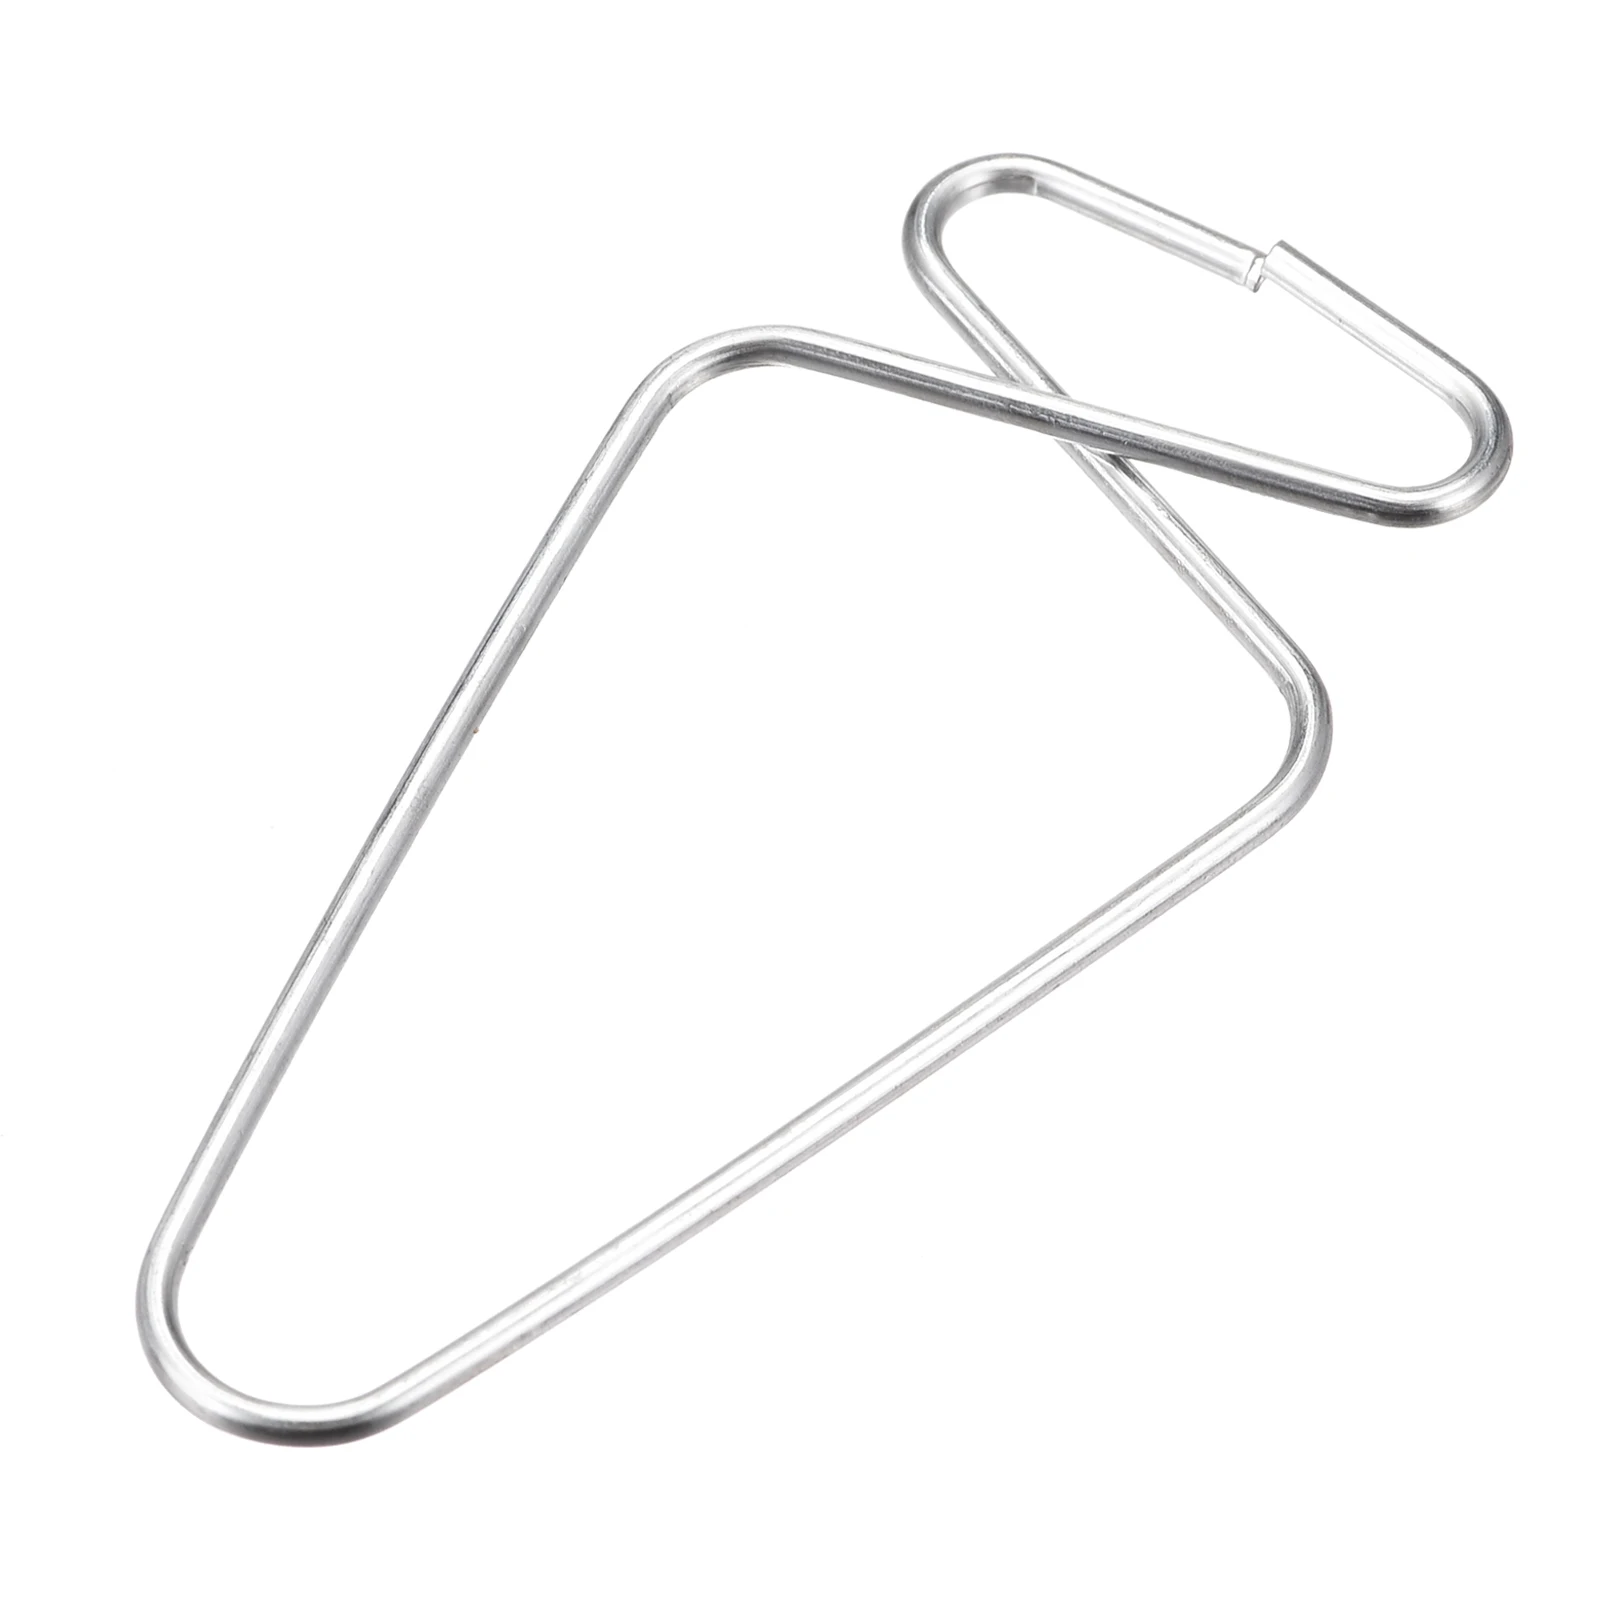 

uxcell Ceiling Hooks Clips Stainless Steel Hangers 2.4 x 1.3 x 0.6 Inch for Home Office Classroom (Silver Finish, 20 Pcs)